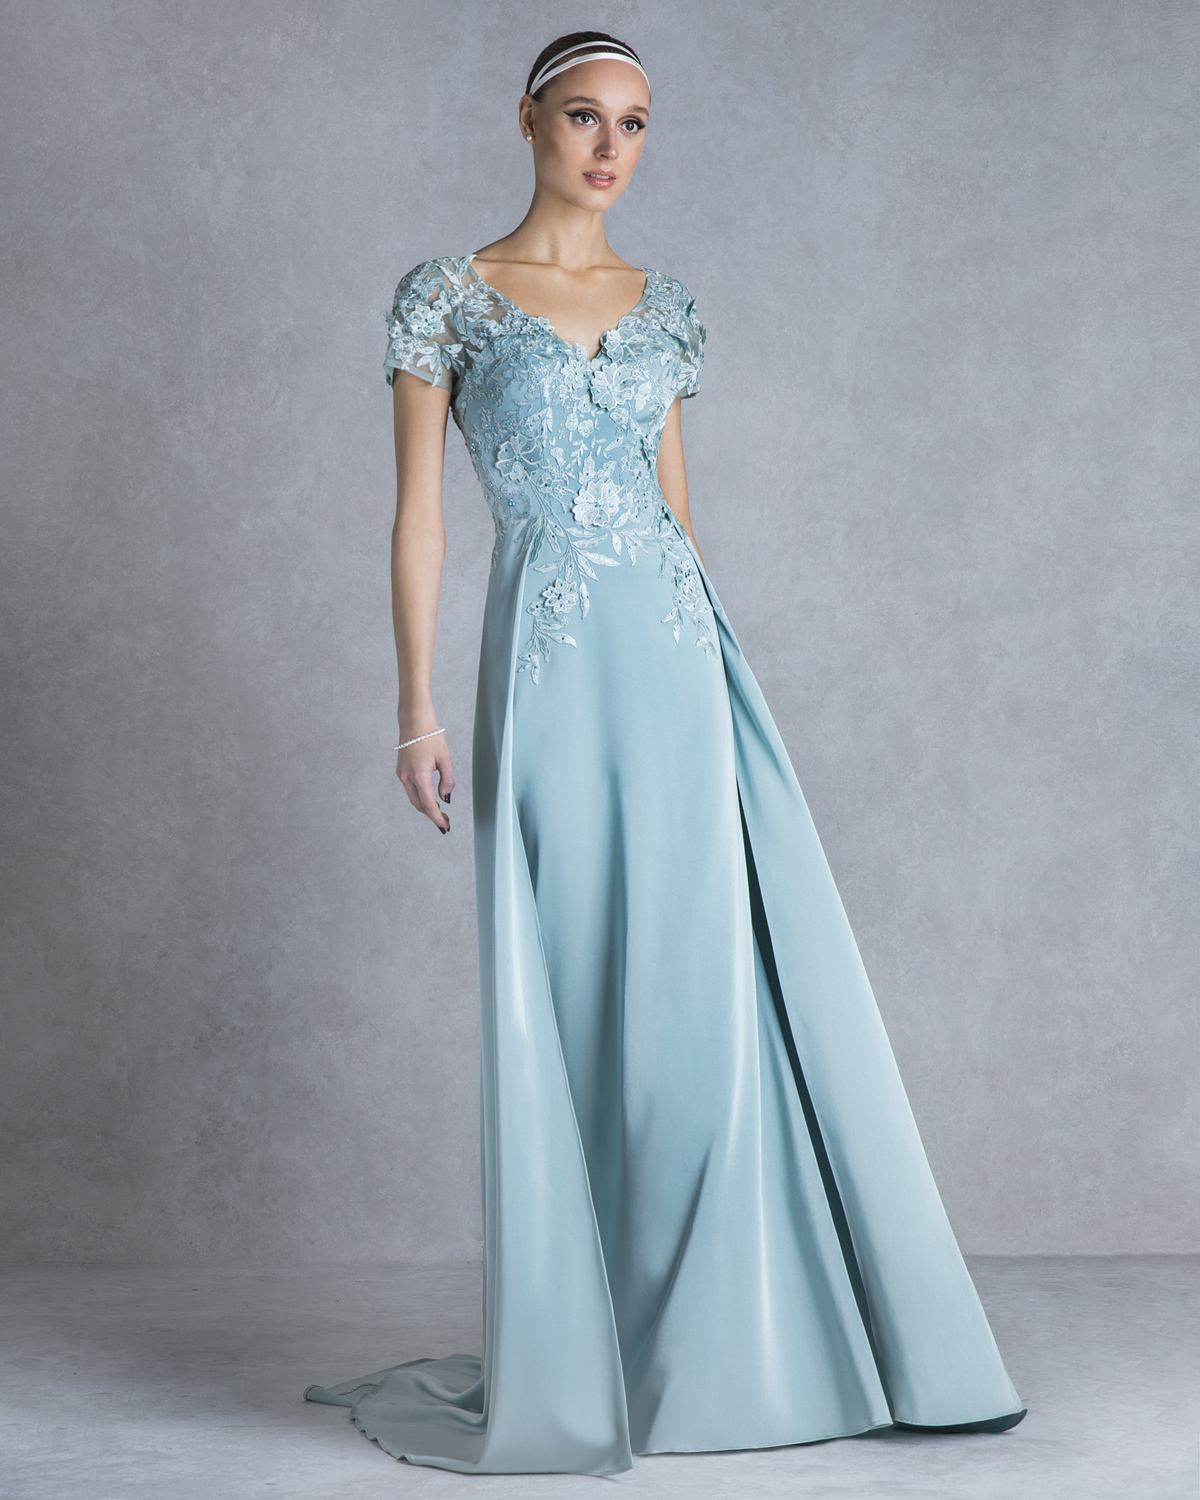 Classic Dresses / Long evening dress with lace for the mother of the bride